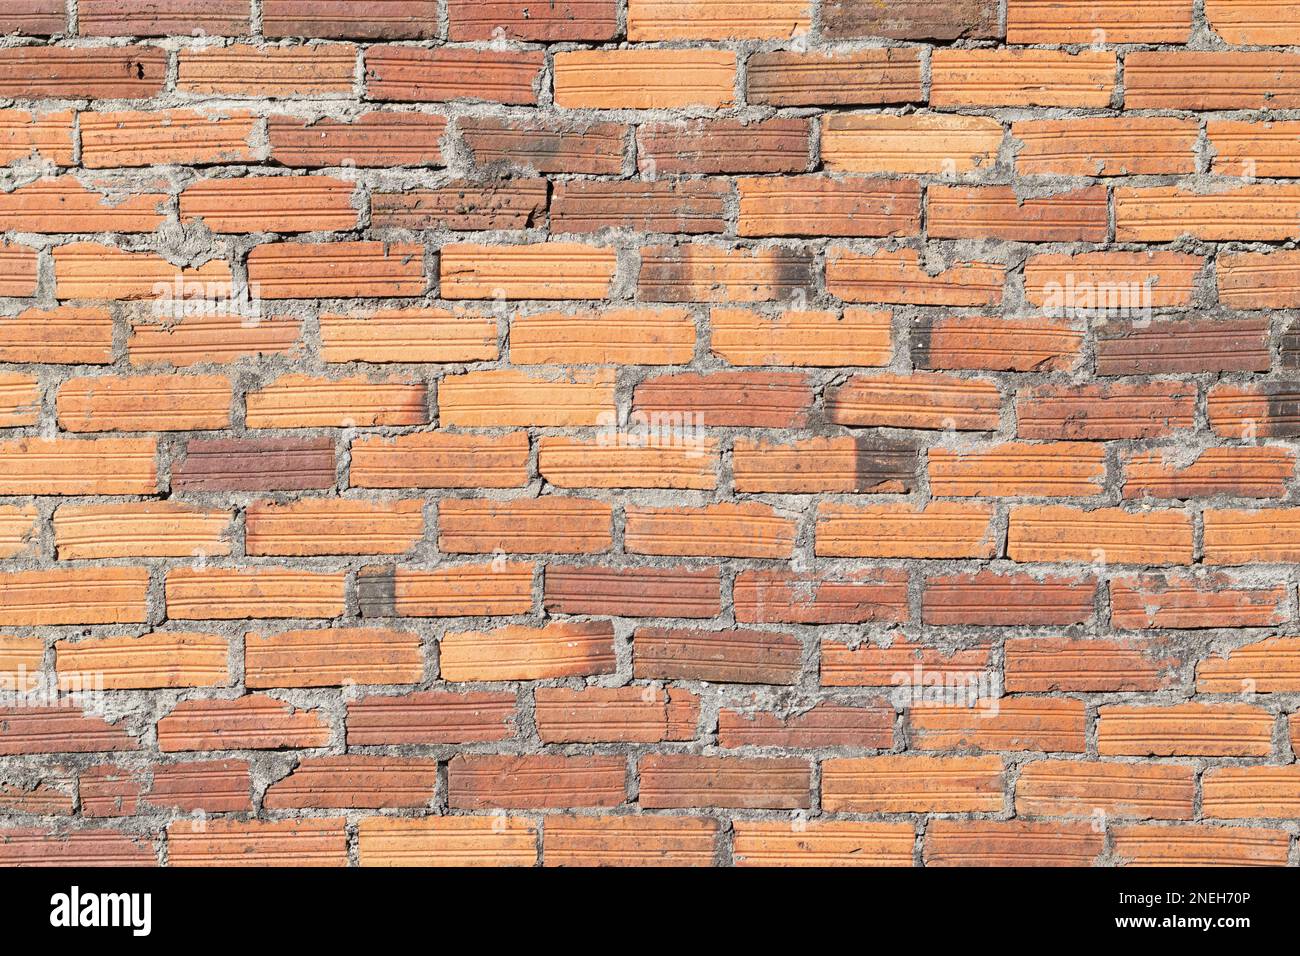 Aged brick wall background texture. Full frame Stock Photo